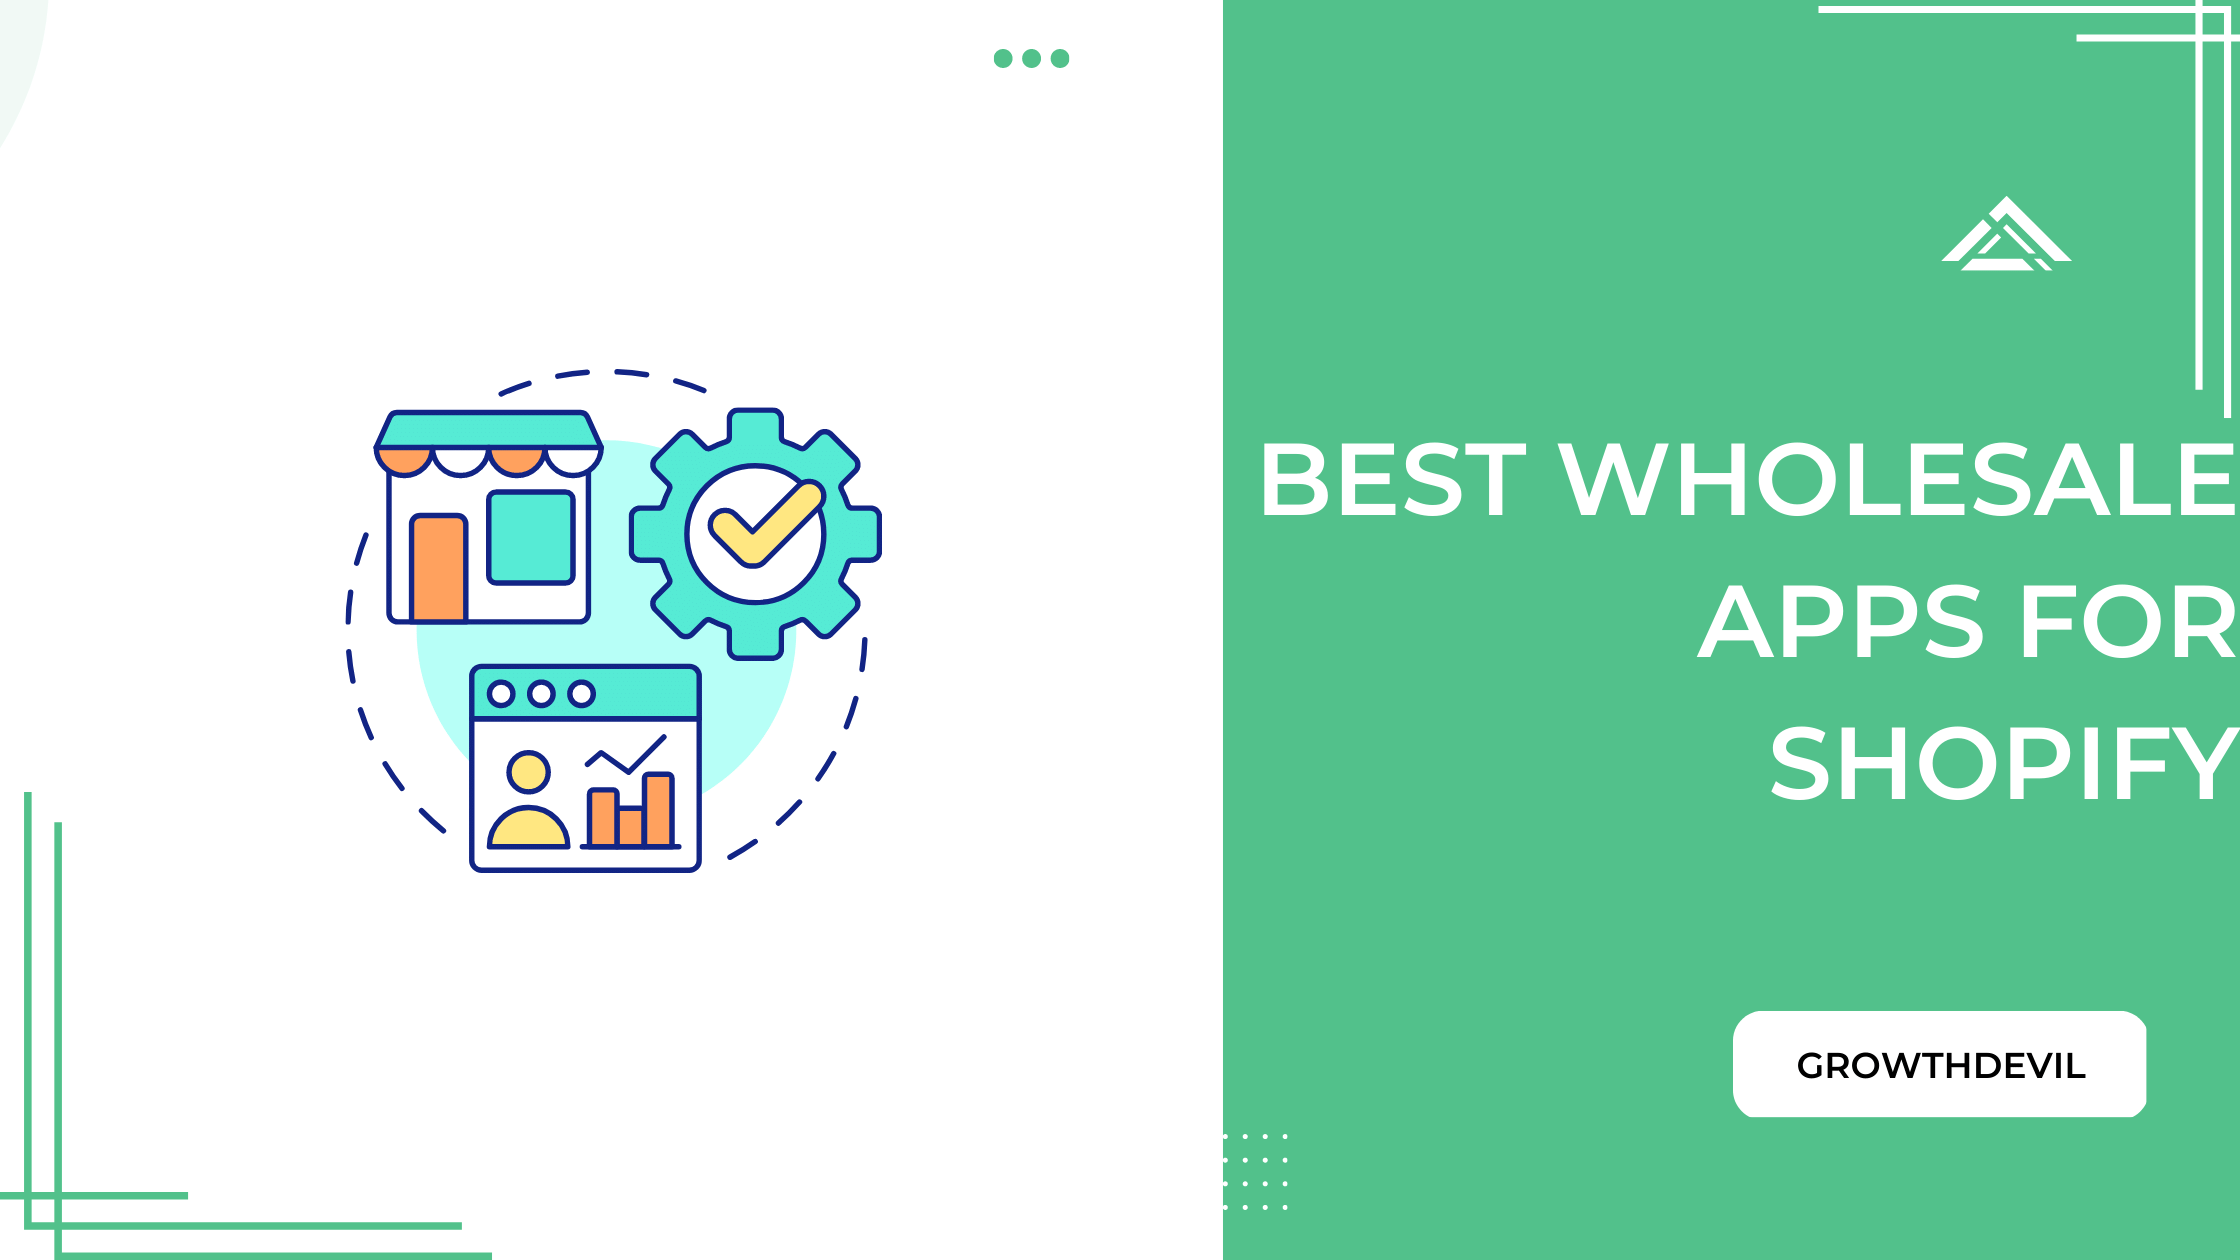 Best Wholesale Apps For Shopify - GrowthDevil